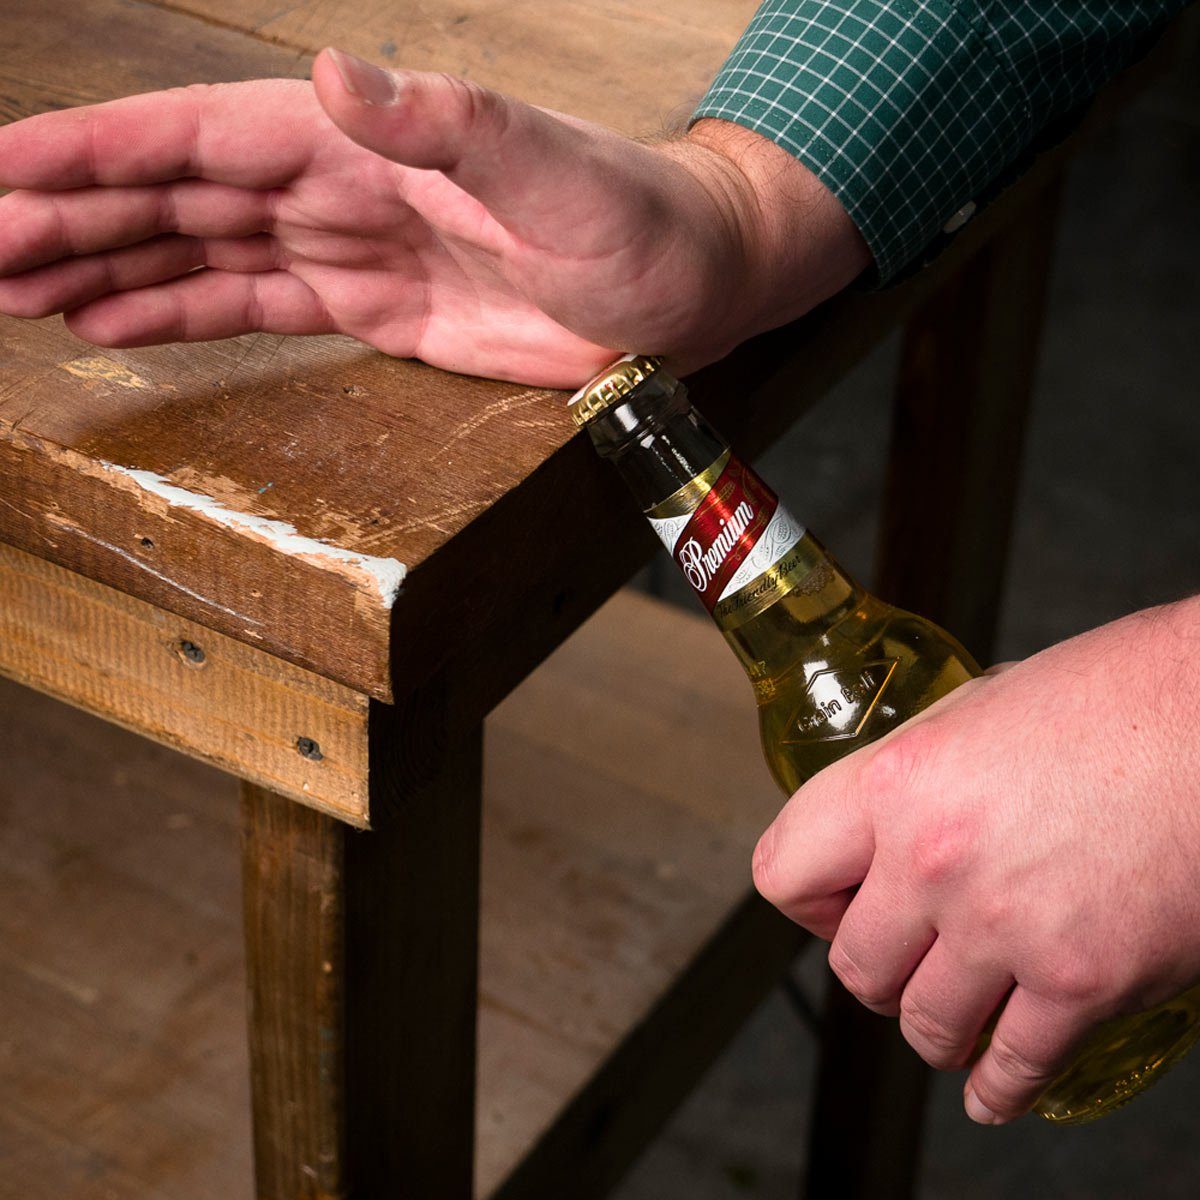 Opening bottle on the edge of a table